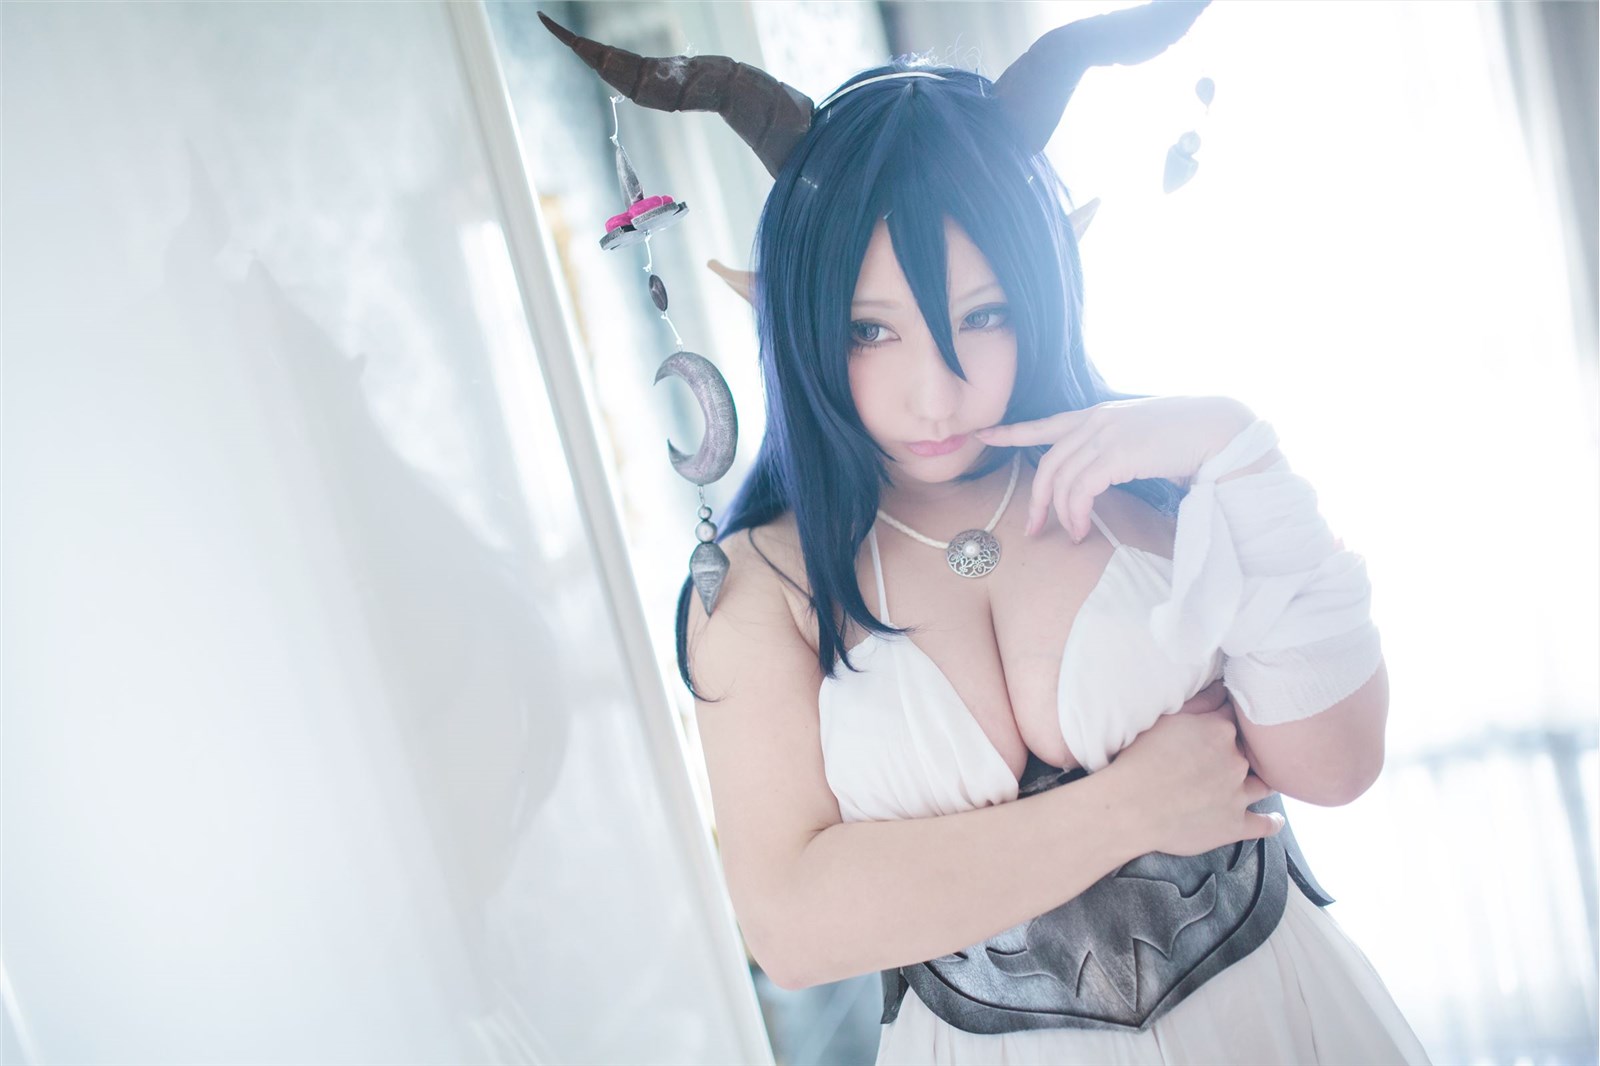 (Cosplay) Shooting Star (サク) ENVY DOLL 294P96MB1(86)